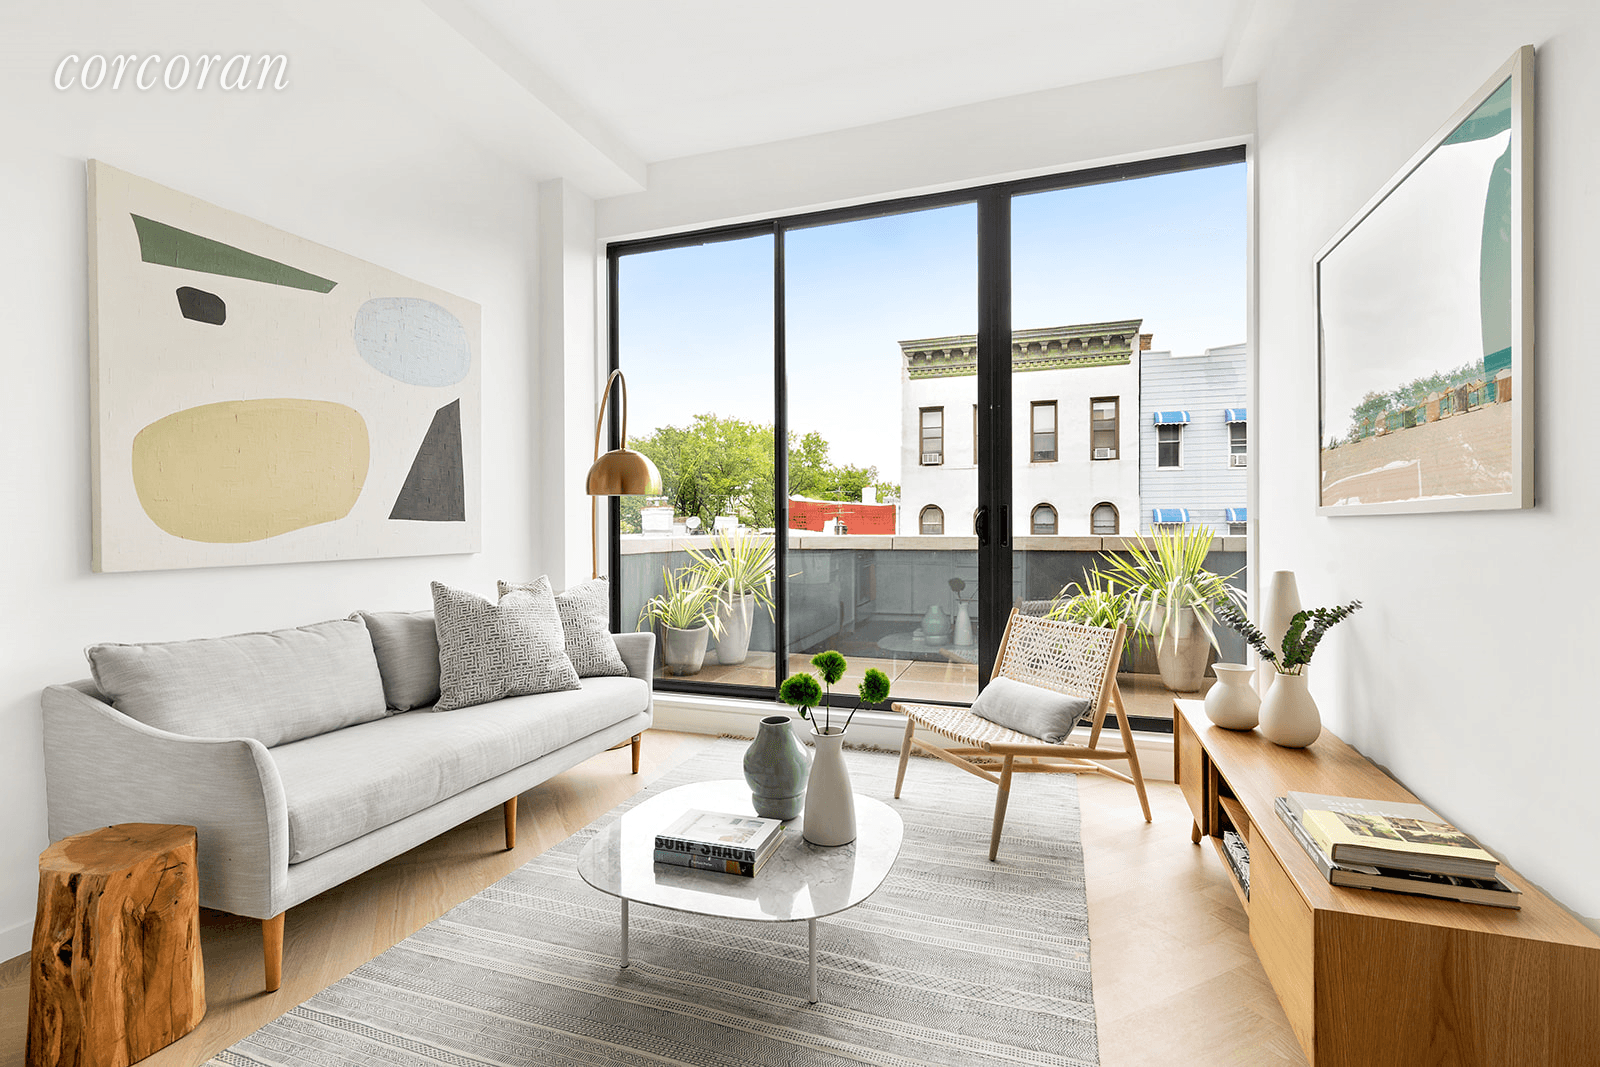 NEW to MARKET ! Prepare to fall head over heels for 539 Lorimer 4 open and airy, custom built condominiums in prime Williamsburg, Brooklyn.